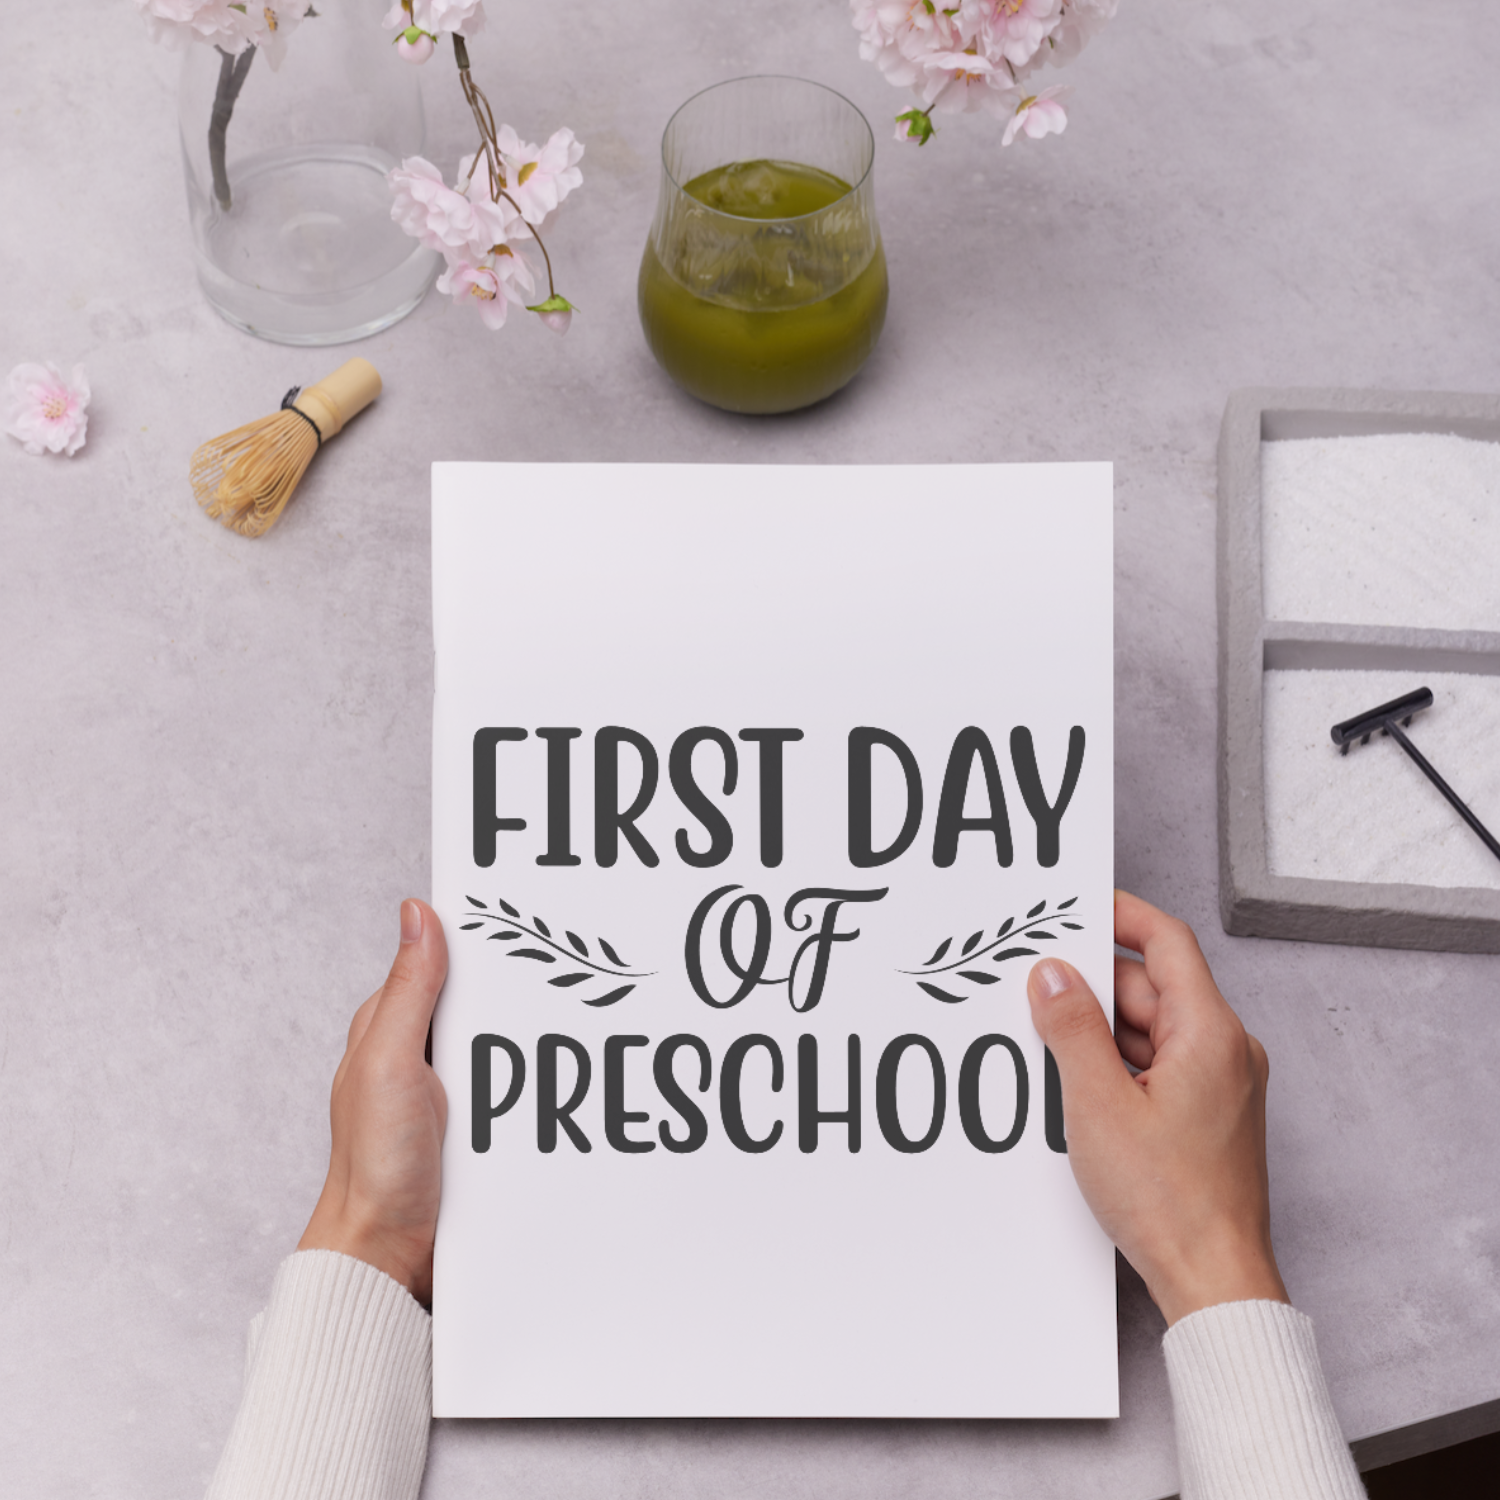 First Day of Preschool SVG | Digital Download | Cut File | SVG - Only The Sweet Stuff